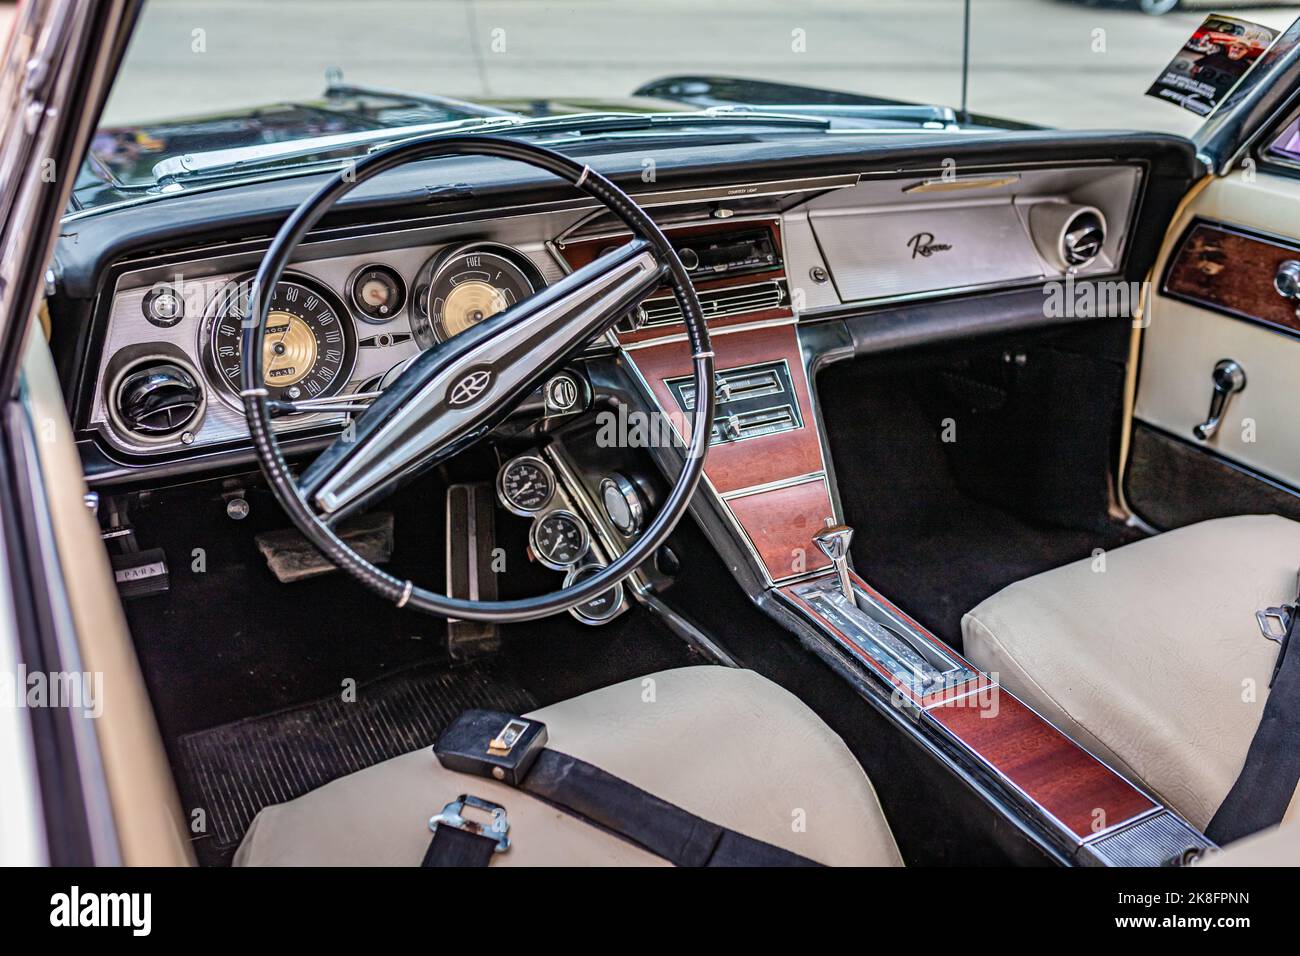 Des Moines, IA - July 01, 2022: High perspective detail interior view of a 1964 Buick Riviera Hardtop Coupe at a local car show. Stock Photo